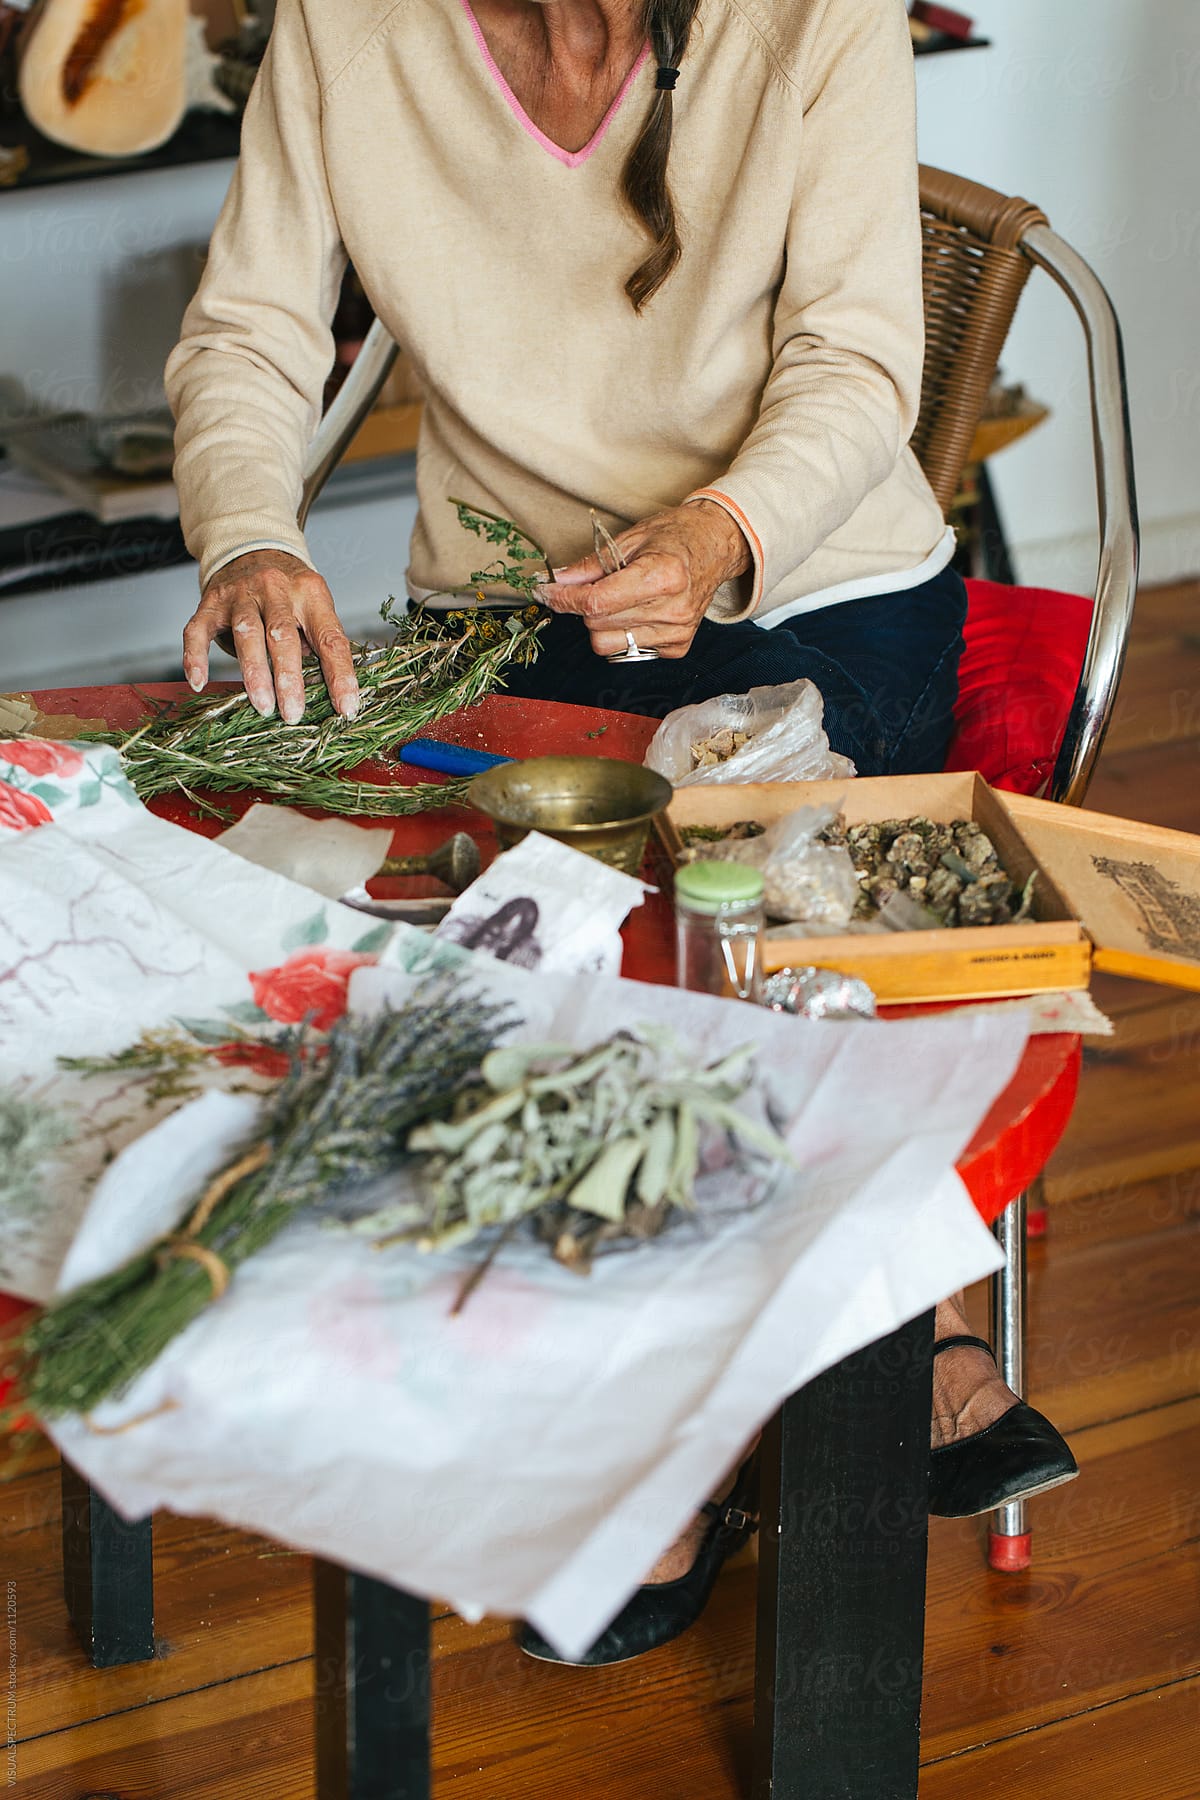 Closeup of Elderly Woman Making Natural Smudge Stick With Dried Herbs